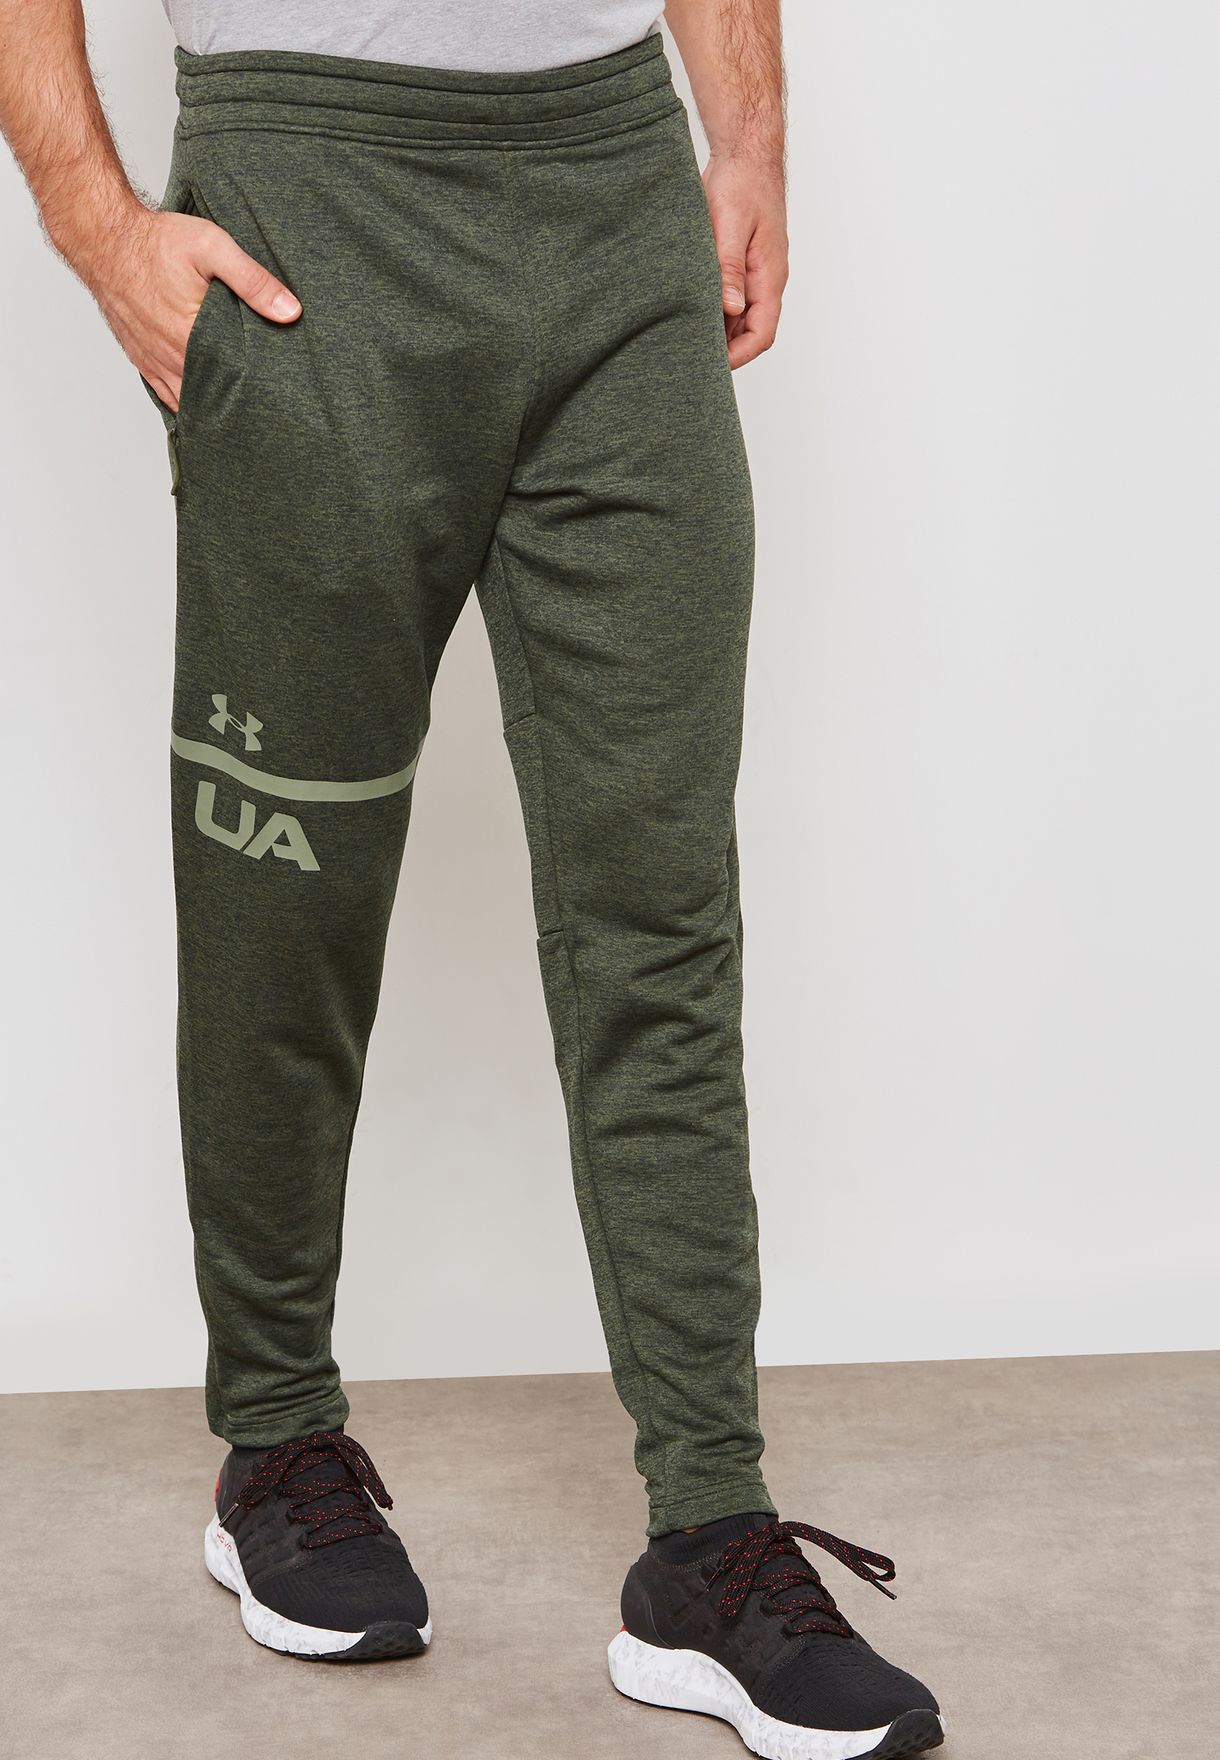 MK1 Terry Tapered Sweatpants for Men 